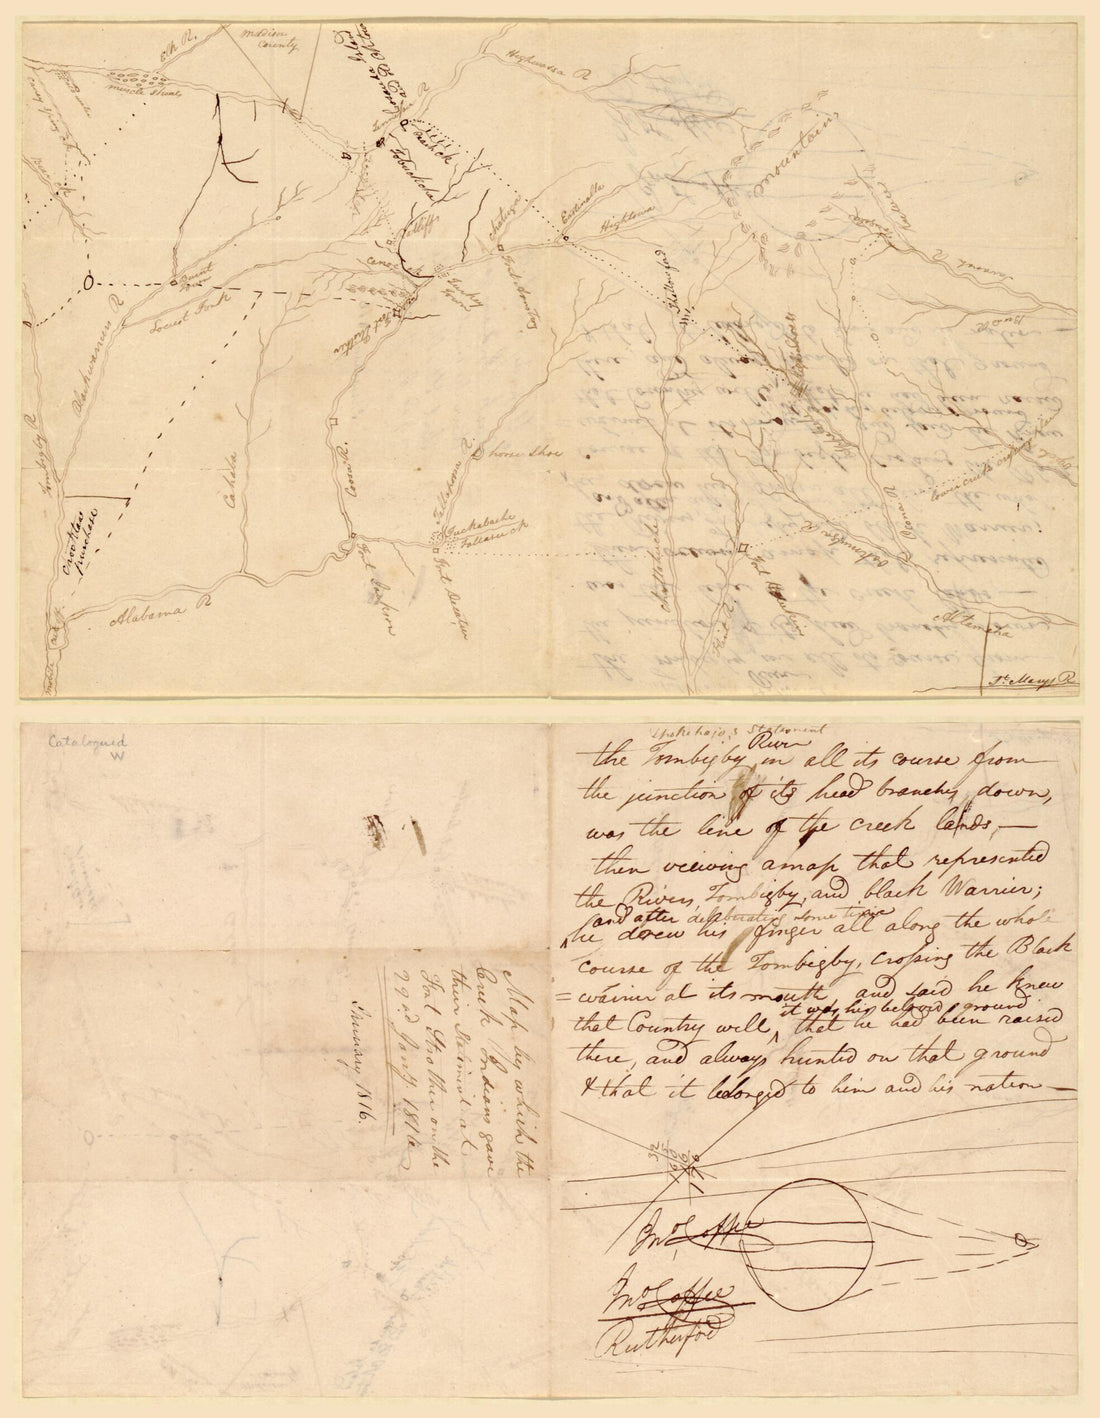 This old map of Map by Which the Creek Indians Gave Their Statement at Fort Strother On the 22nd Jany, from 1816 : Alabama and Georgia was created by  in 1816